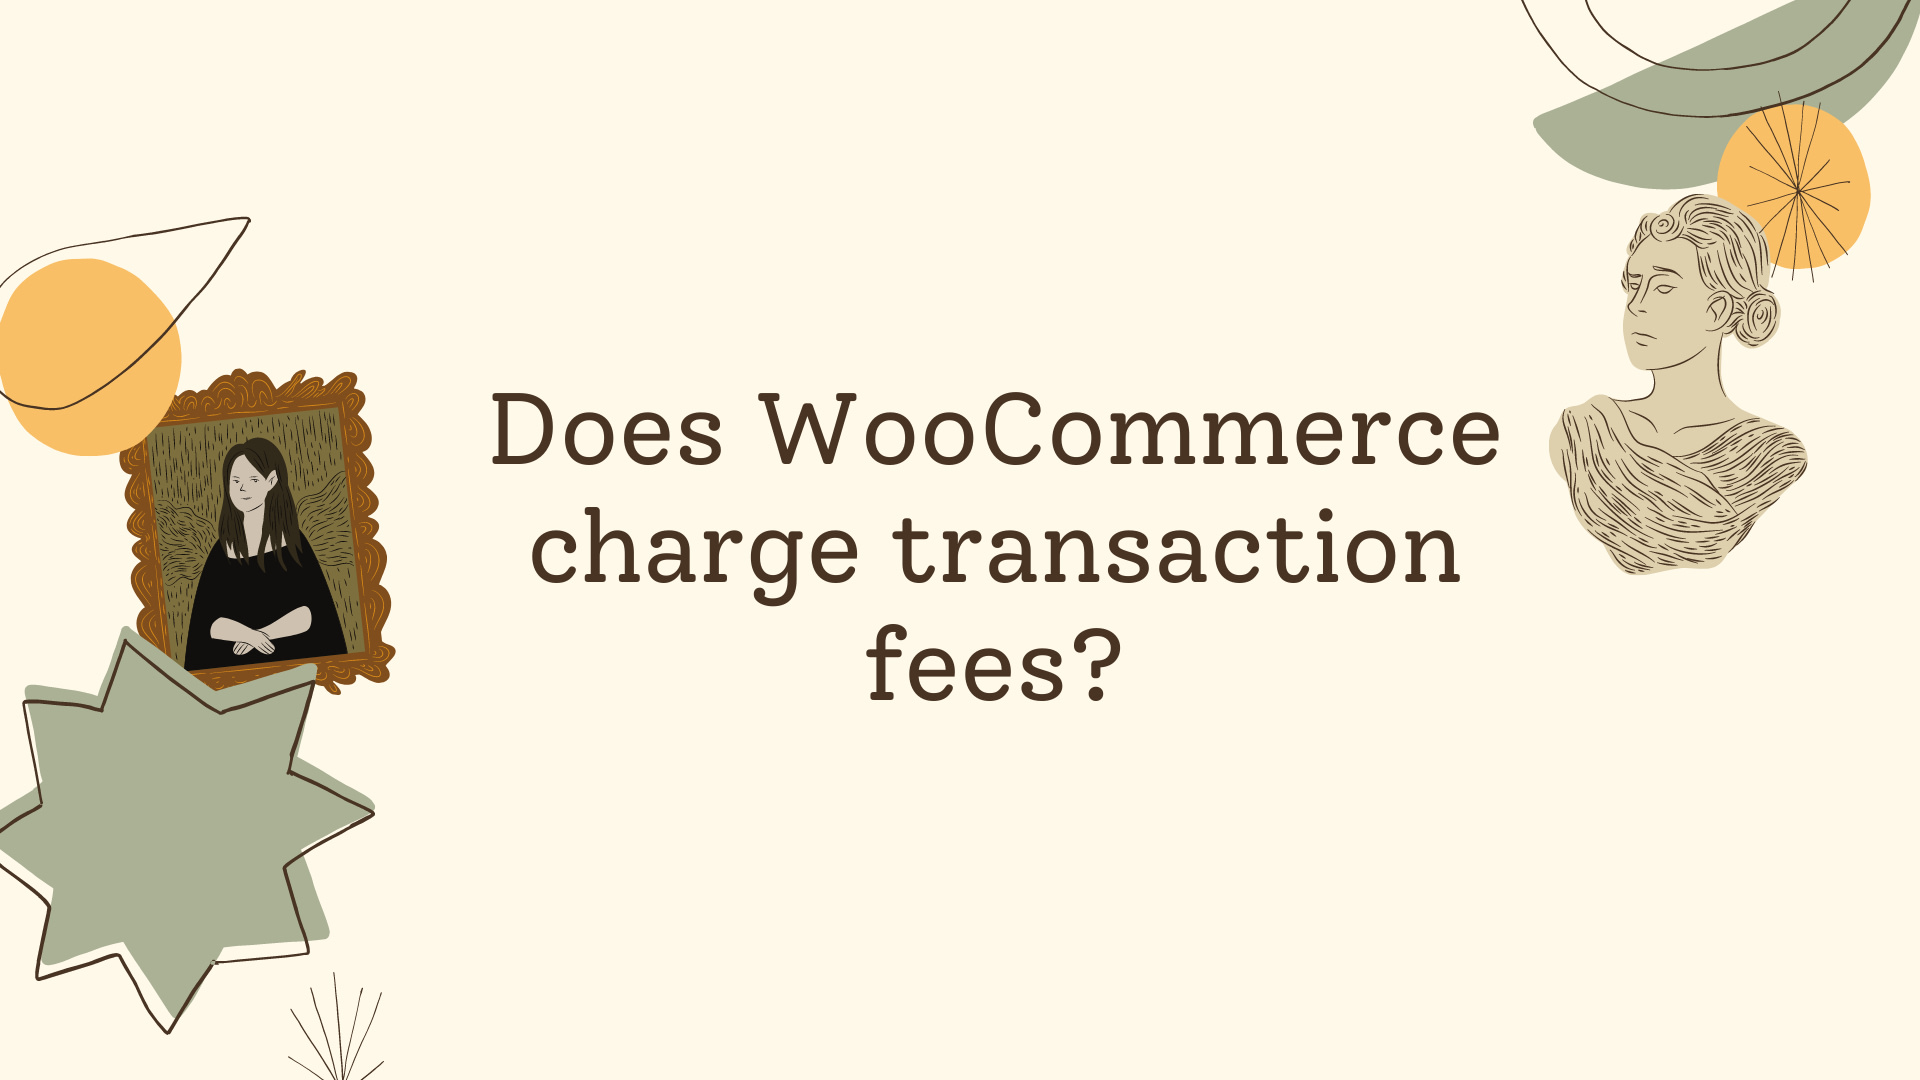 Does WooCommerce charge transaction fees